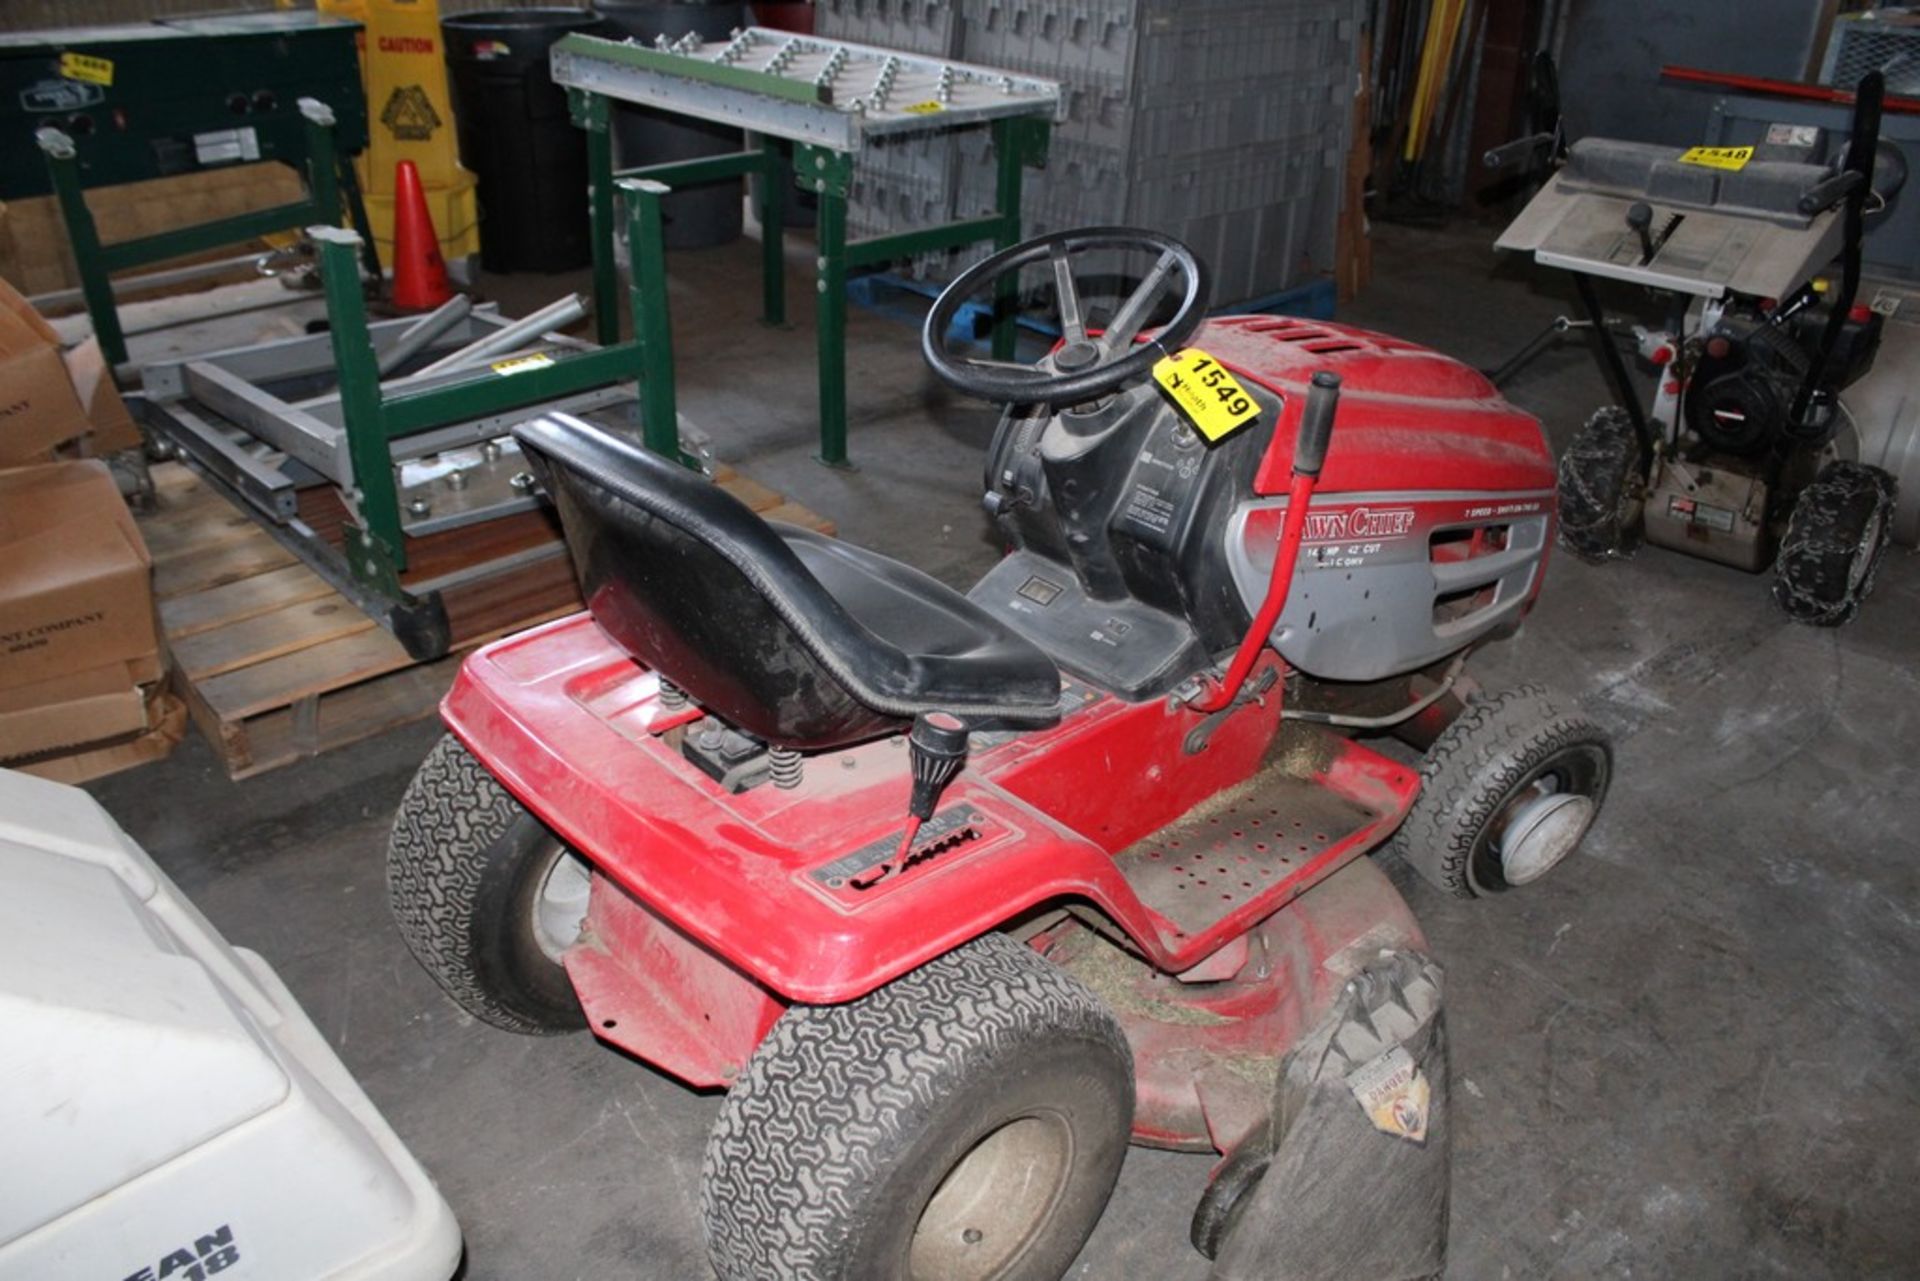 LAWN CHIEF 42" RIDING LAWN MOWER WITH BRIGGS & STRATTON 14.5 HP GAS ENGINE, 7 SPEED, SHIFT ON THE GO